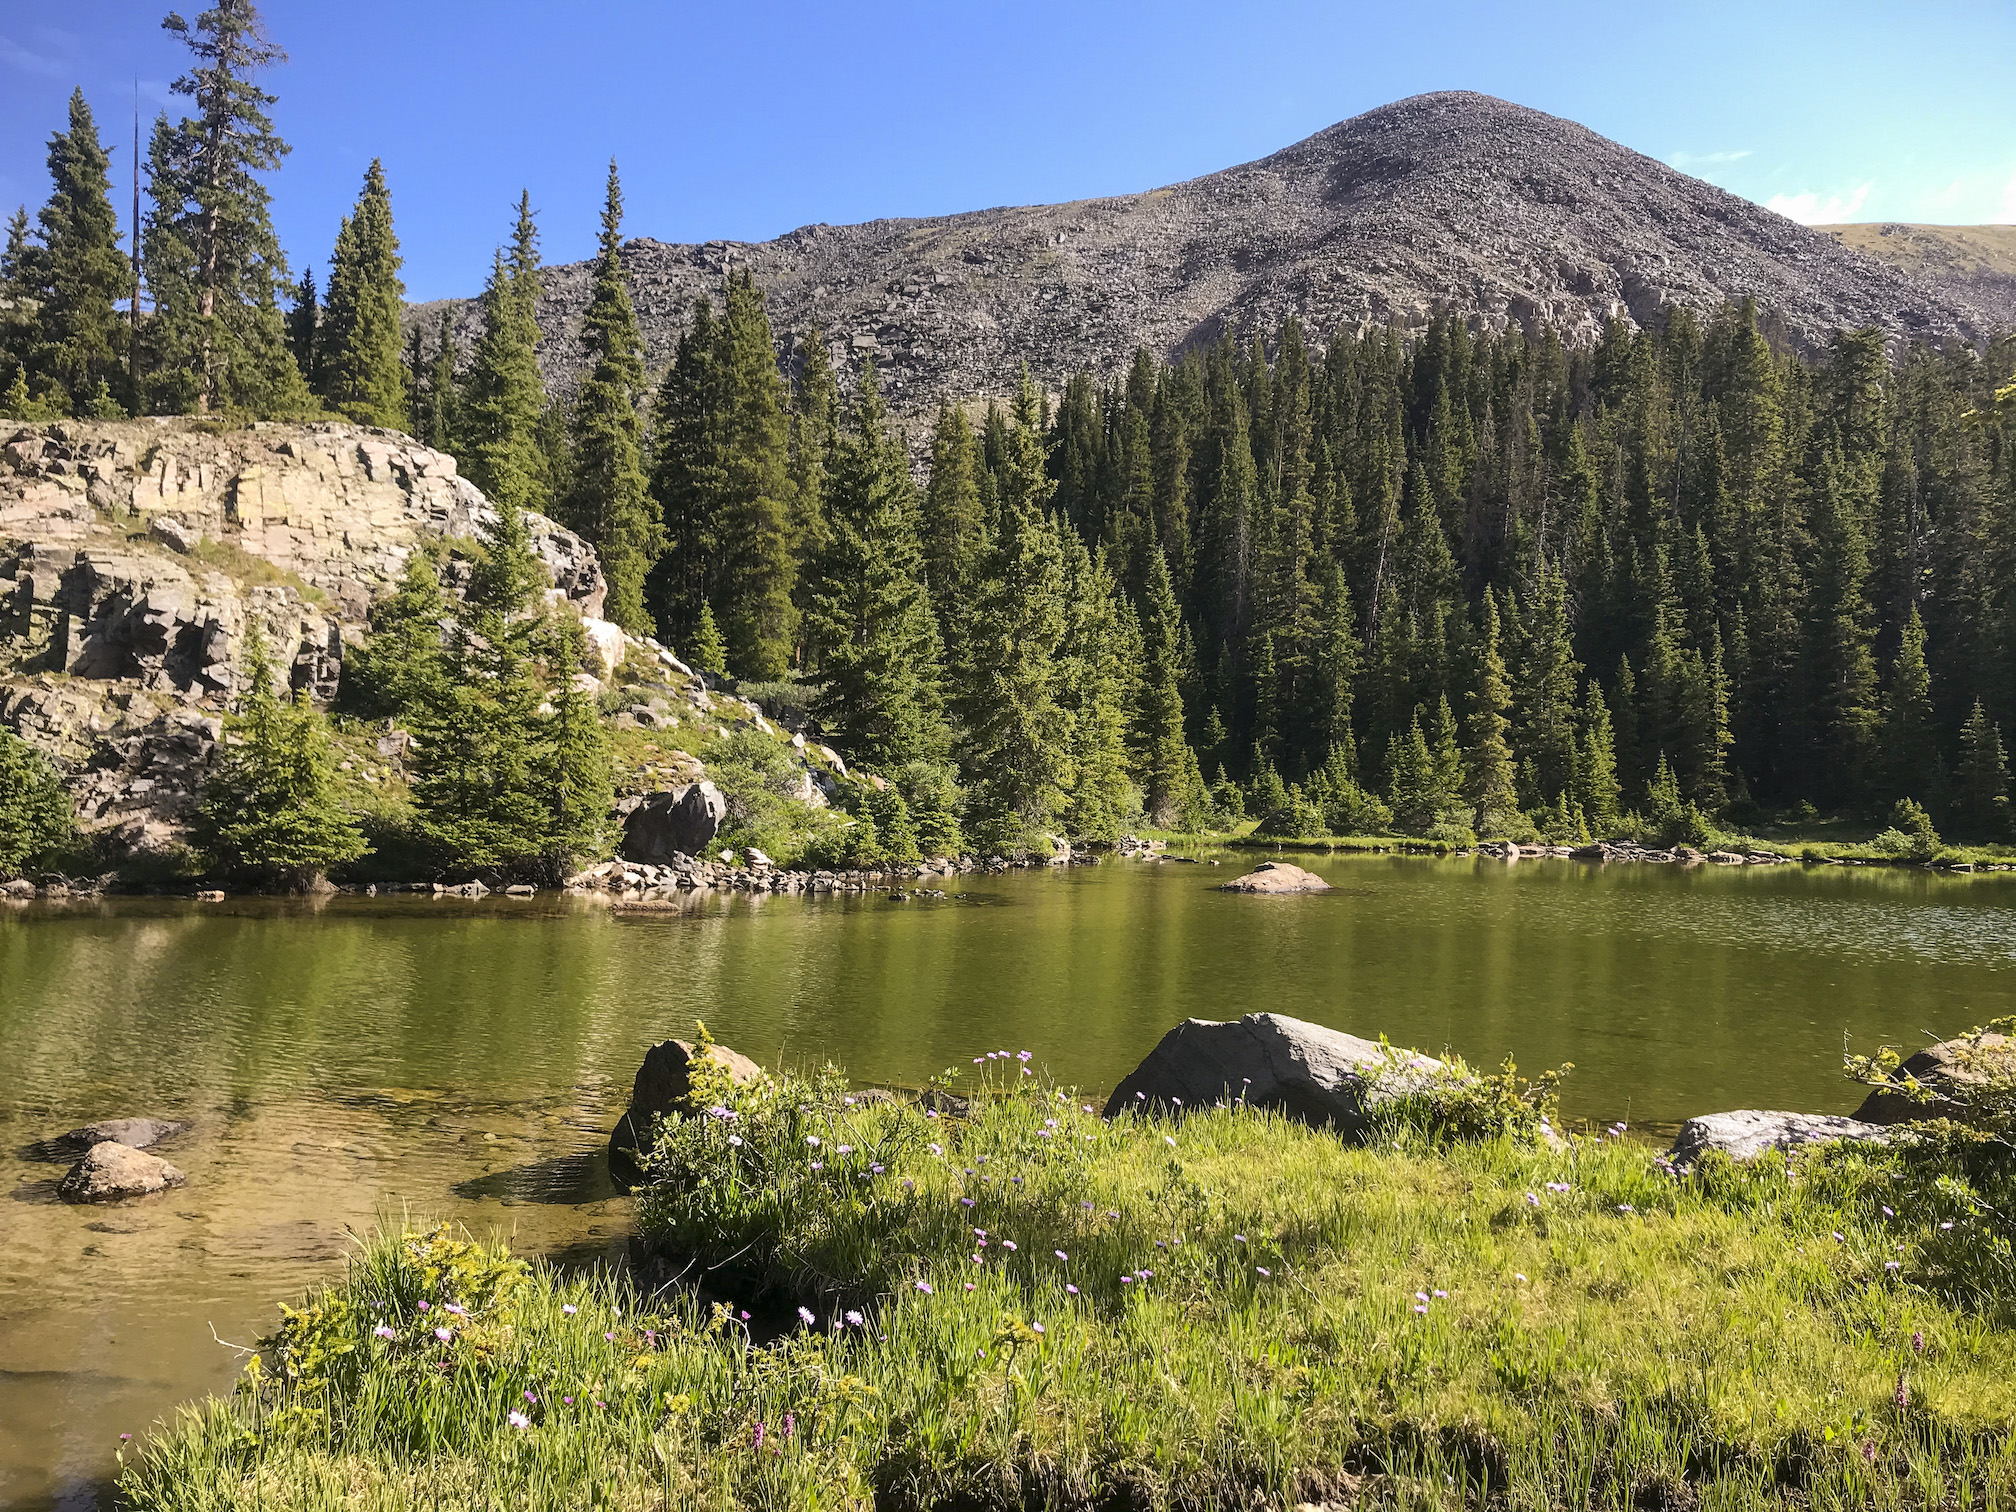 Lamphier lake in fossil ridge in gunnison, colorado. An alpine lake with a mountain peak and trees lining in.